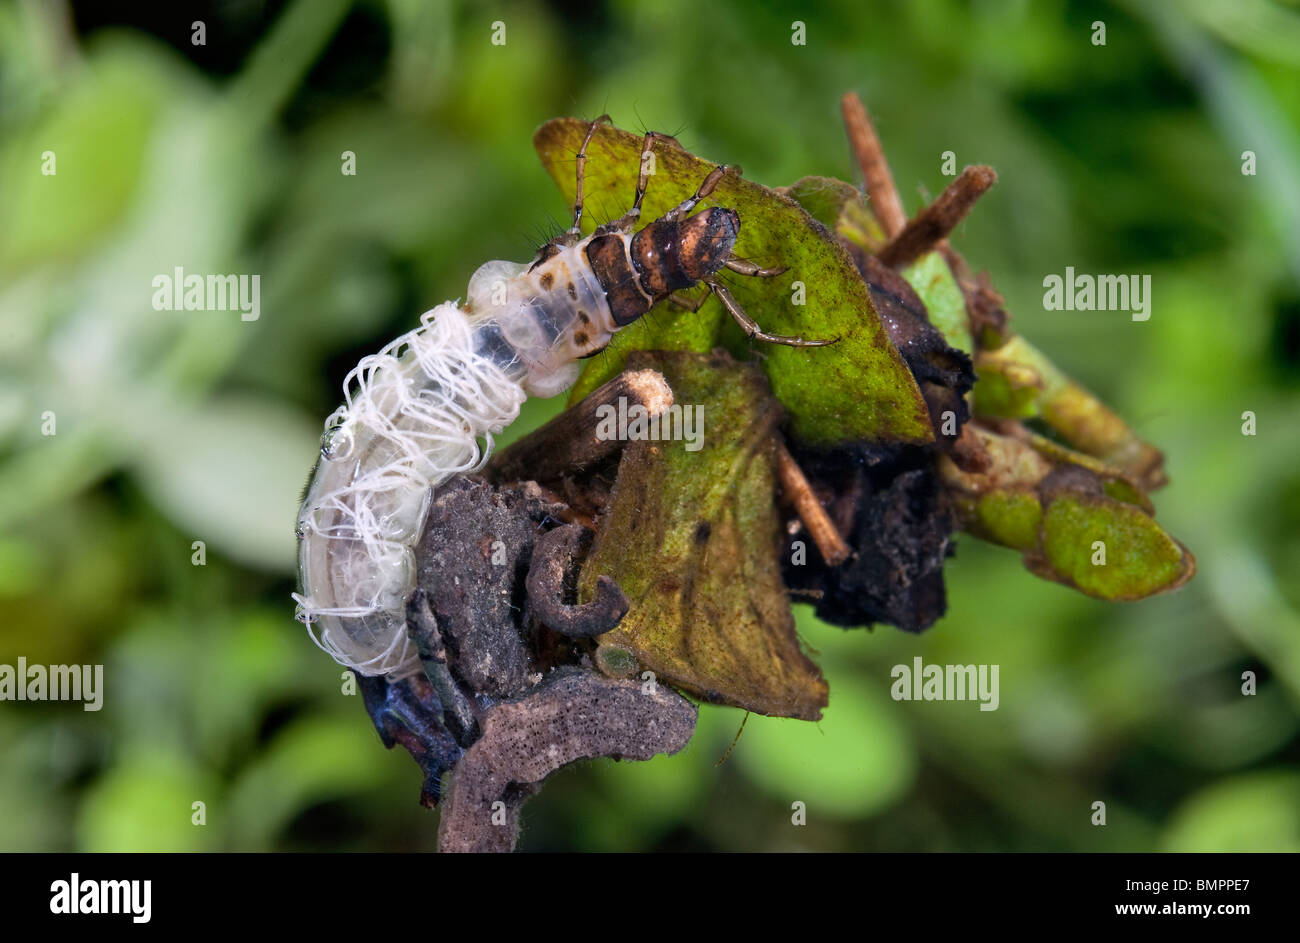 Caddisfly larvae are the youthful stage of the Caddisfly, an insect. Stock Photo